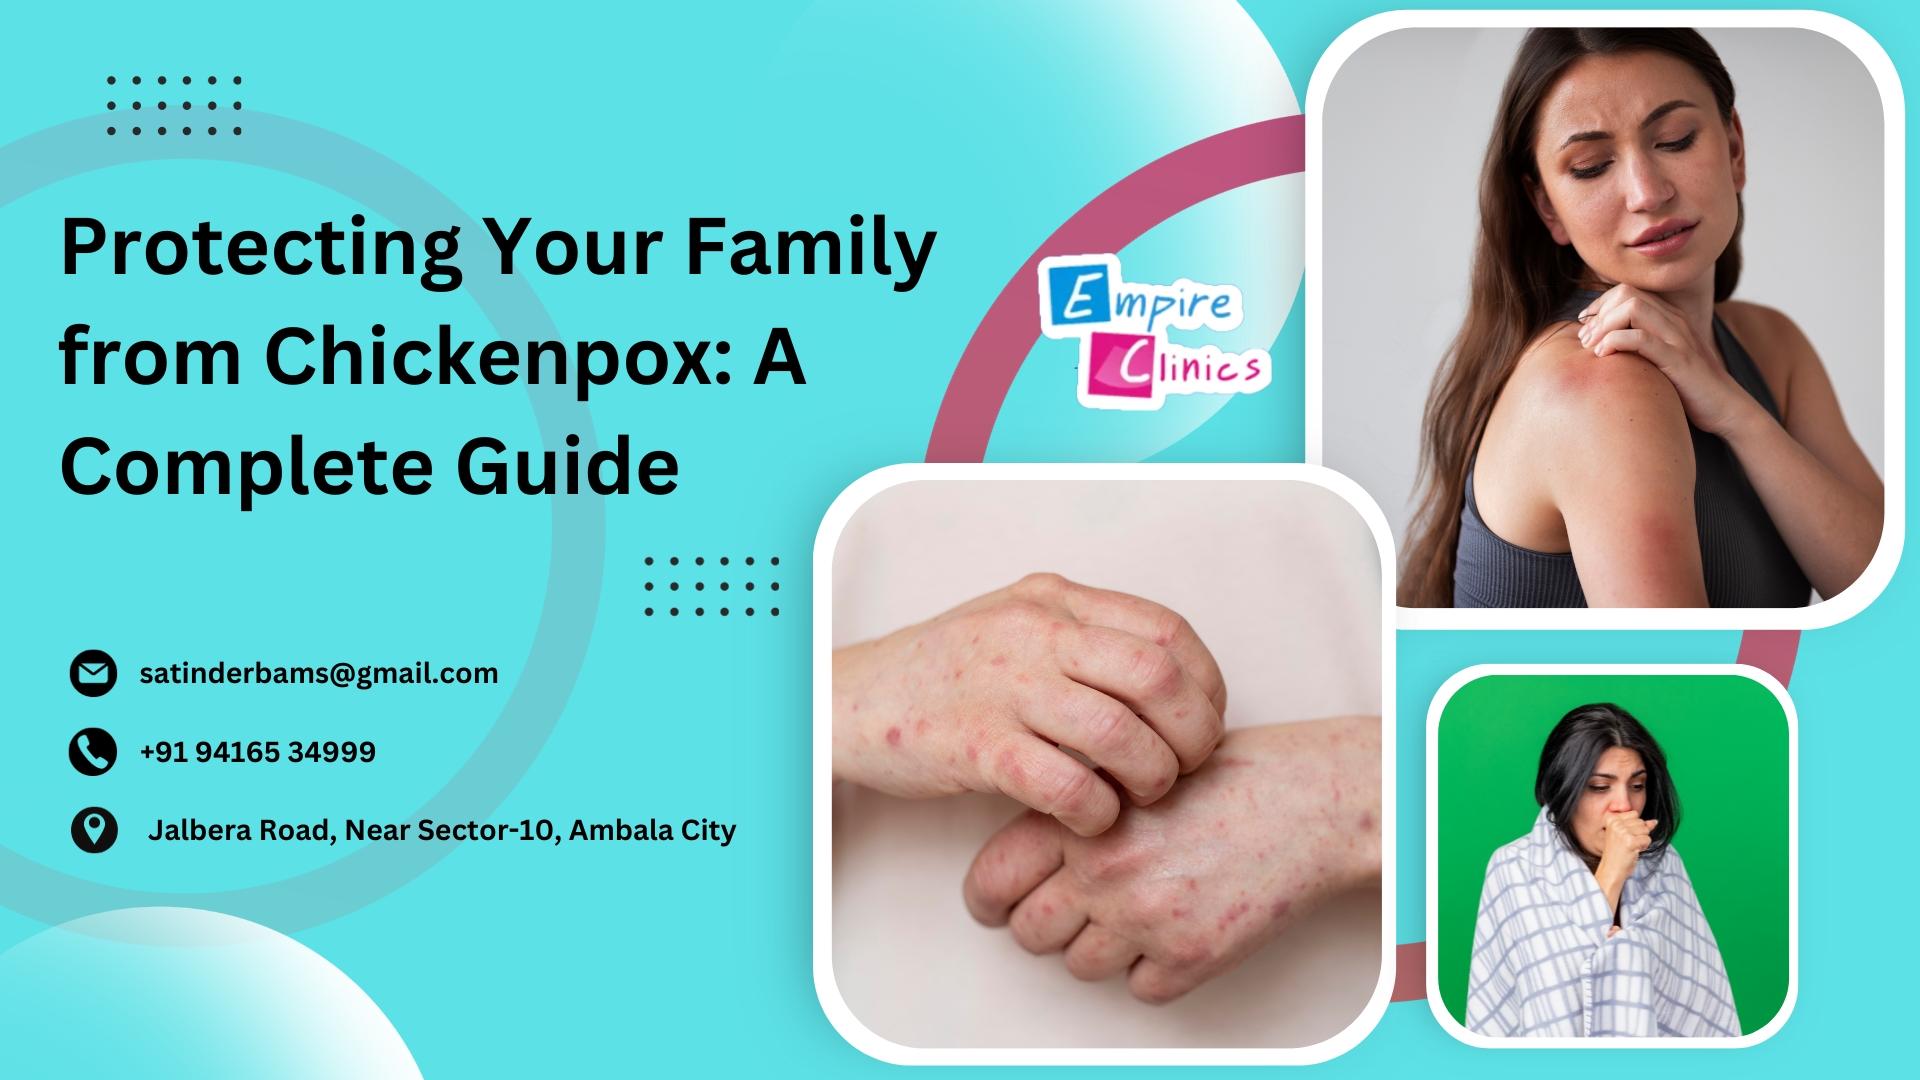 Protecting Your Family from Chickenpox: A Complete Guide